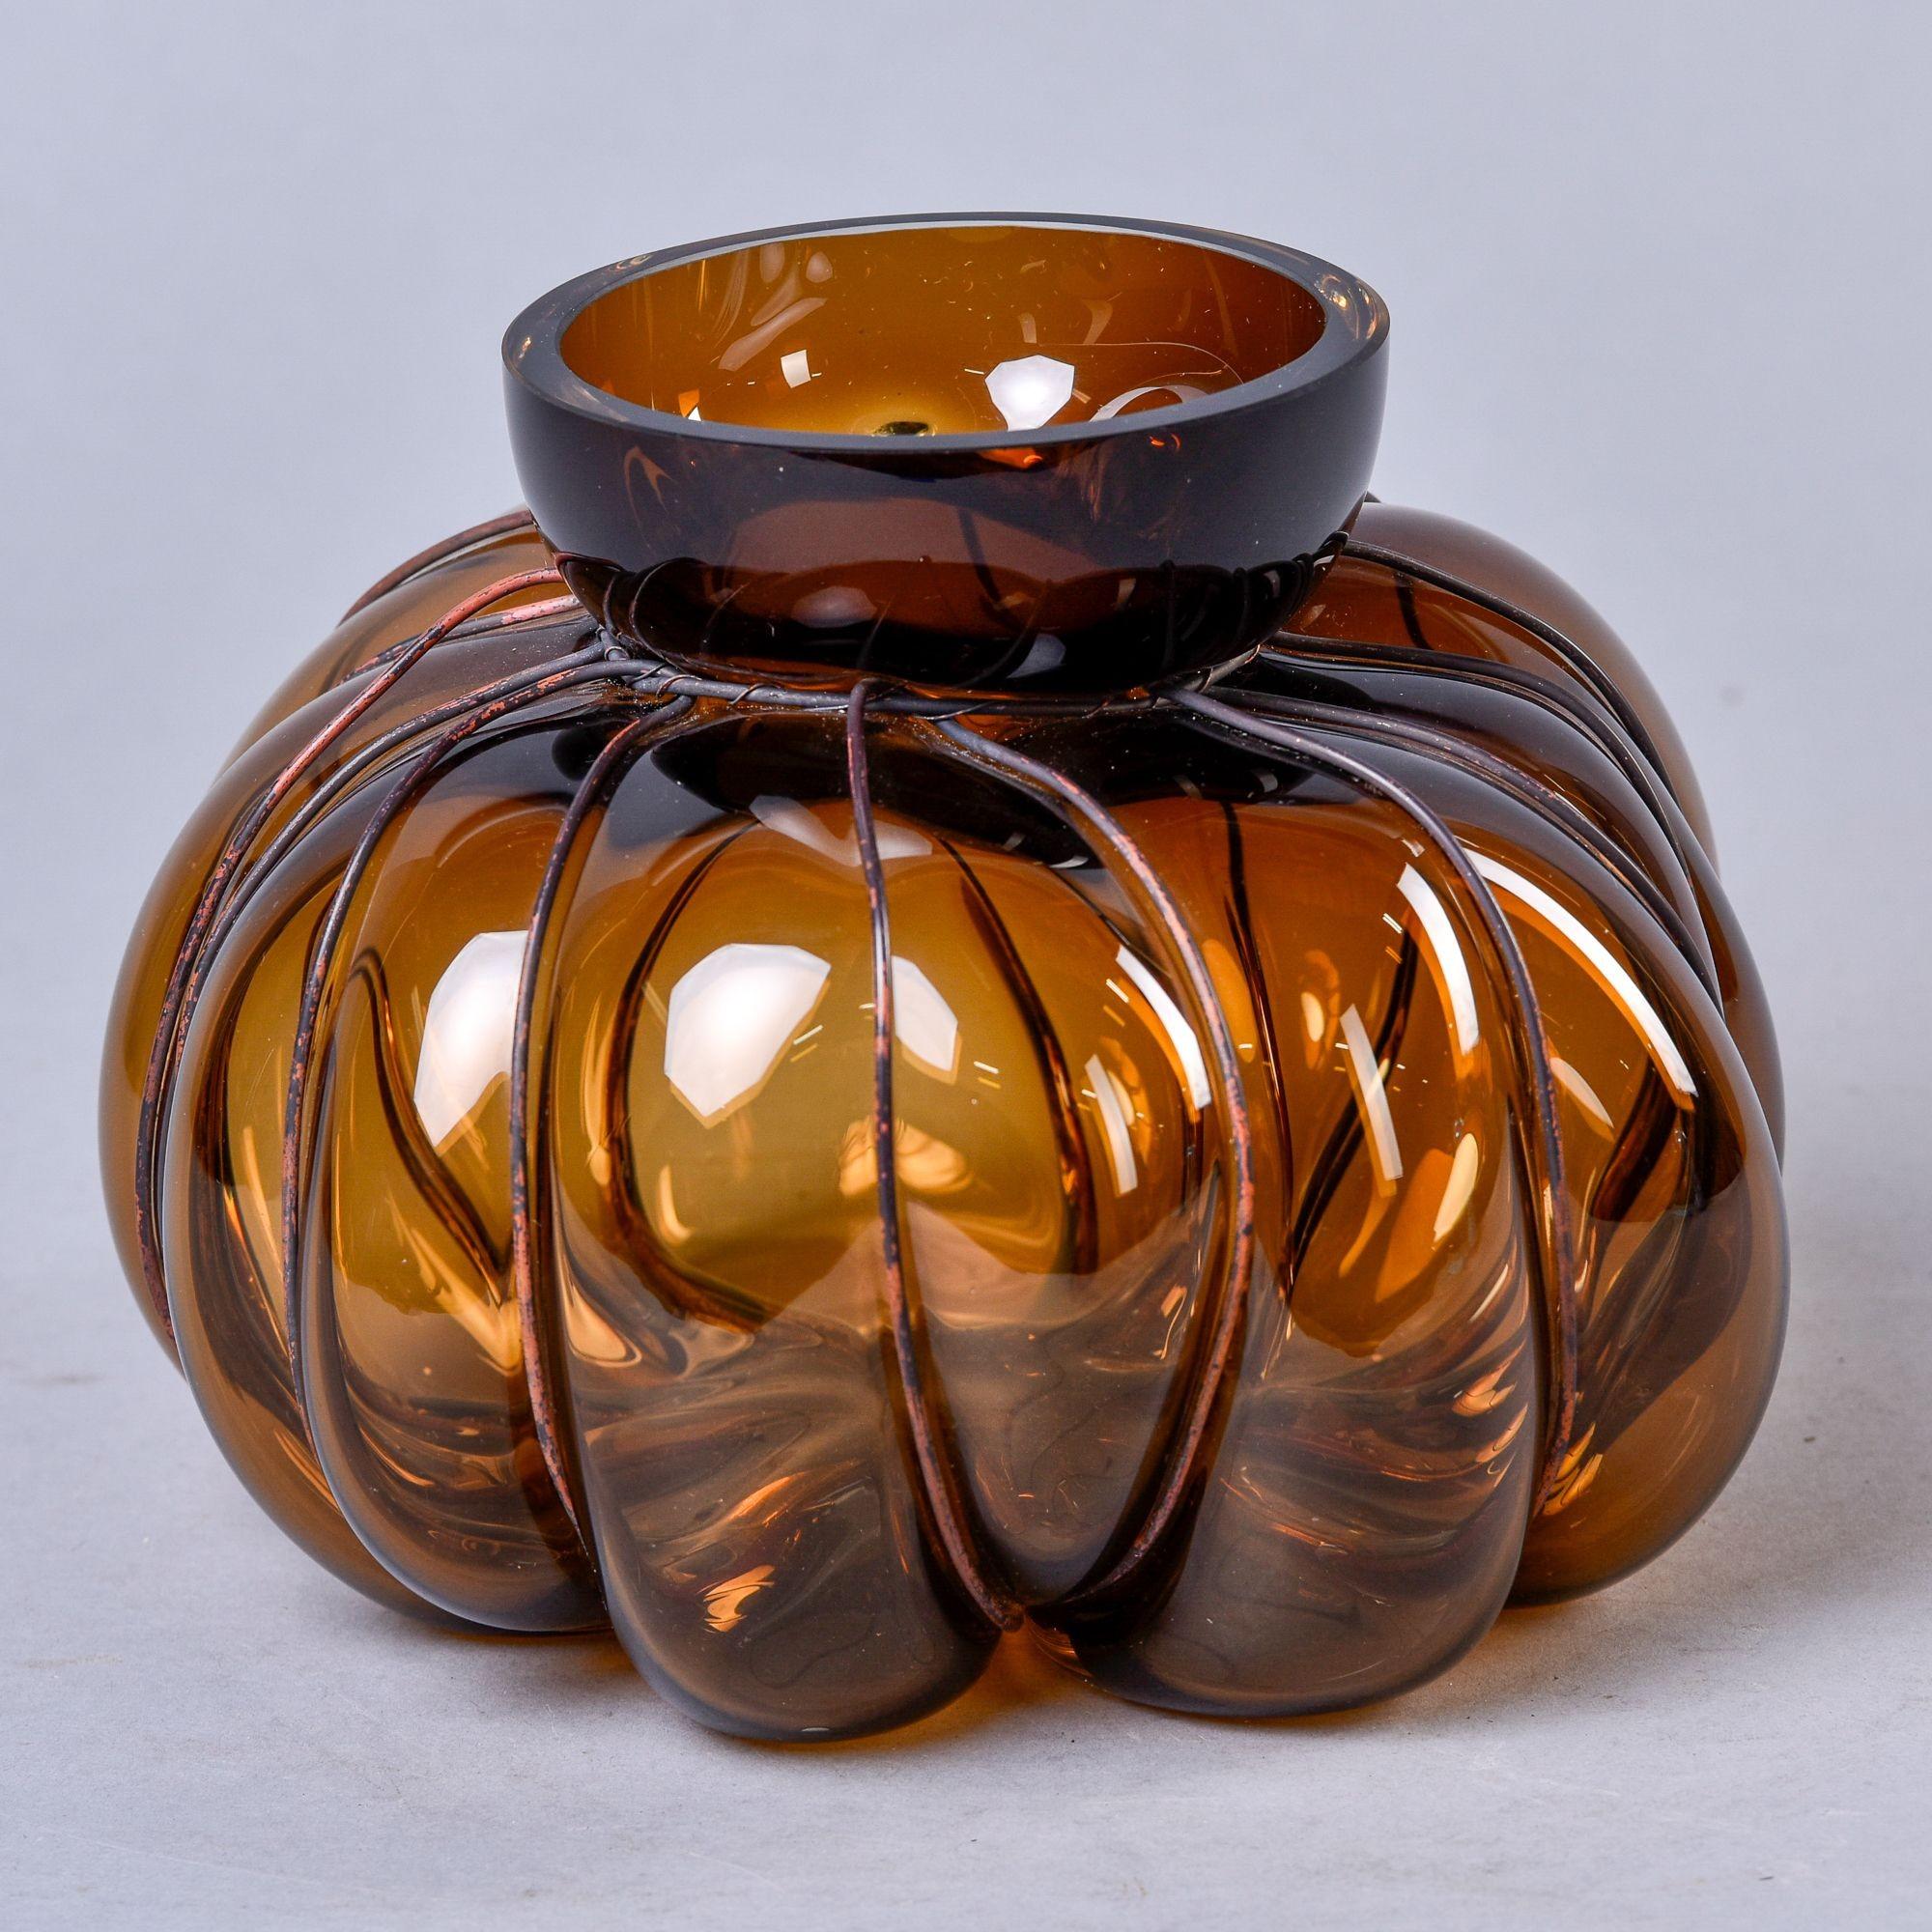 New mouth blown vase with metal surround by French glass artist Vanessa Mitrani. Glass has a rich amber tone and interesting, biomorphic gourd-like shape.